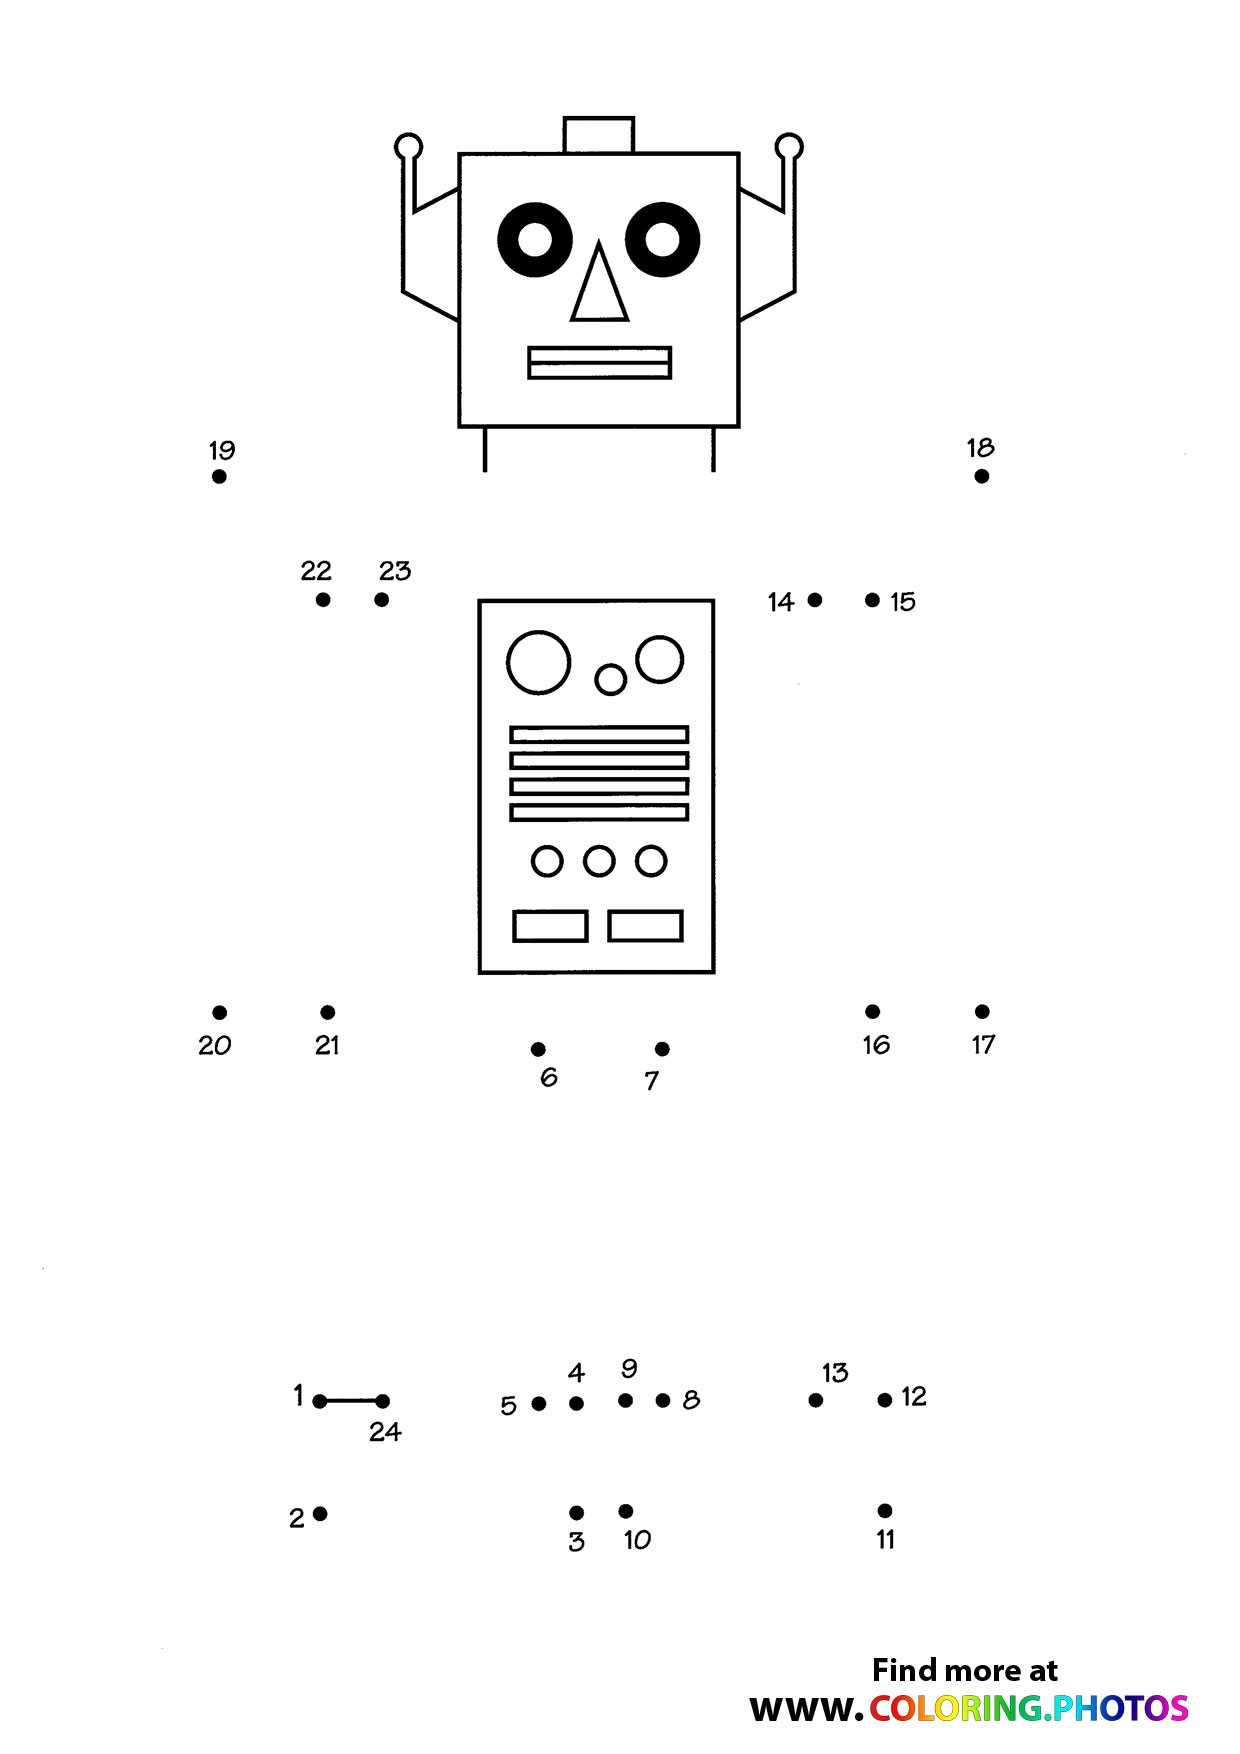 Robot dot the dots - Coloring Pages for kids